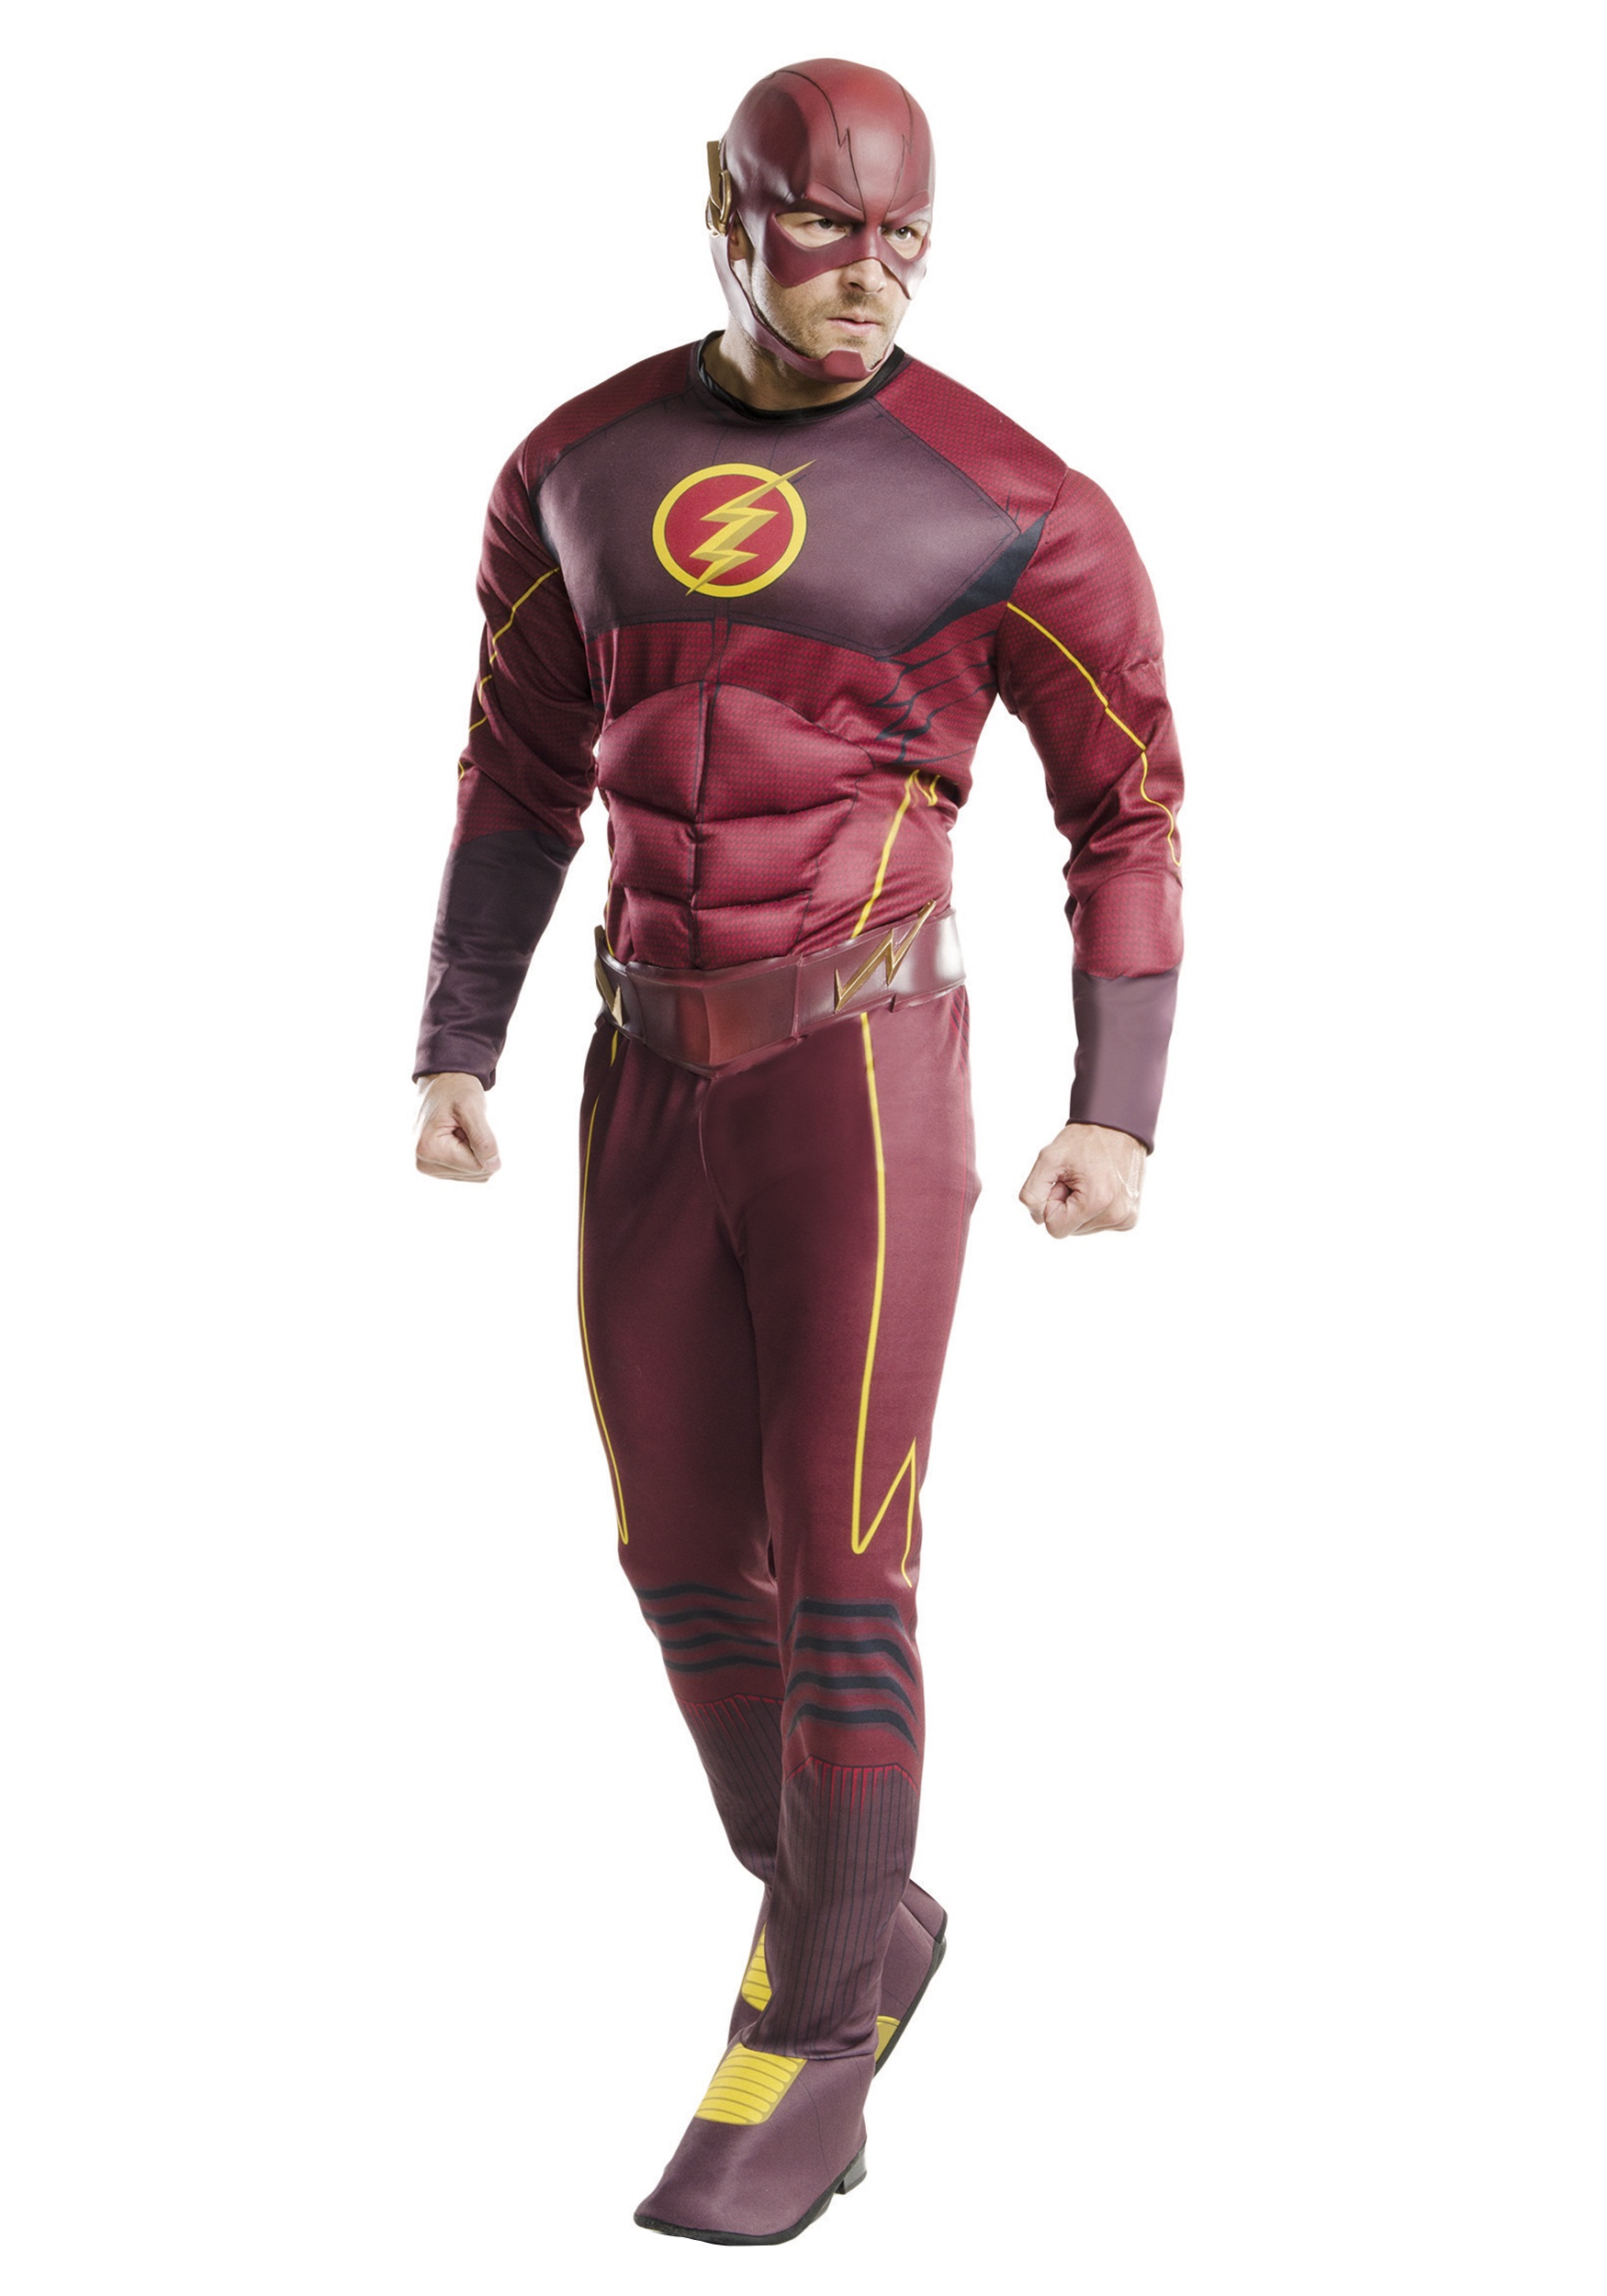 Deluxe The Flash Mens Fancy Dress Muscle Superhero Comic Adults Costume Outfit 